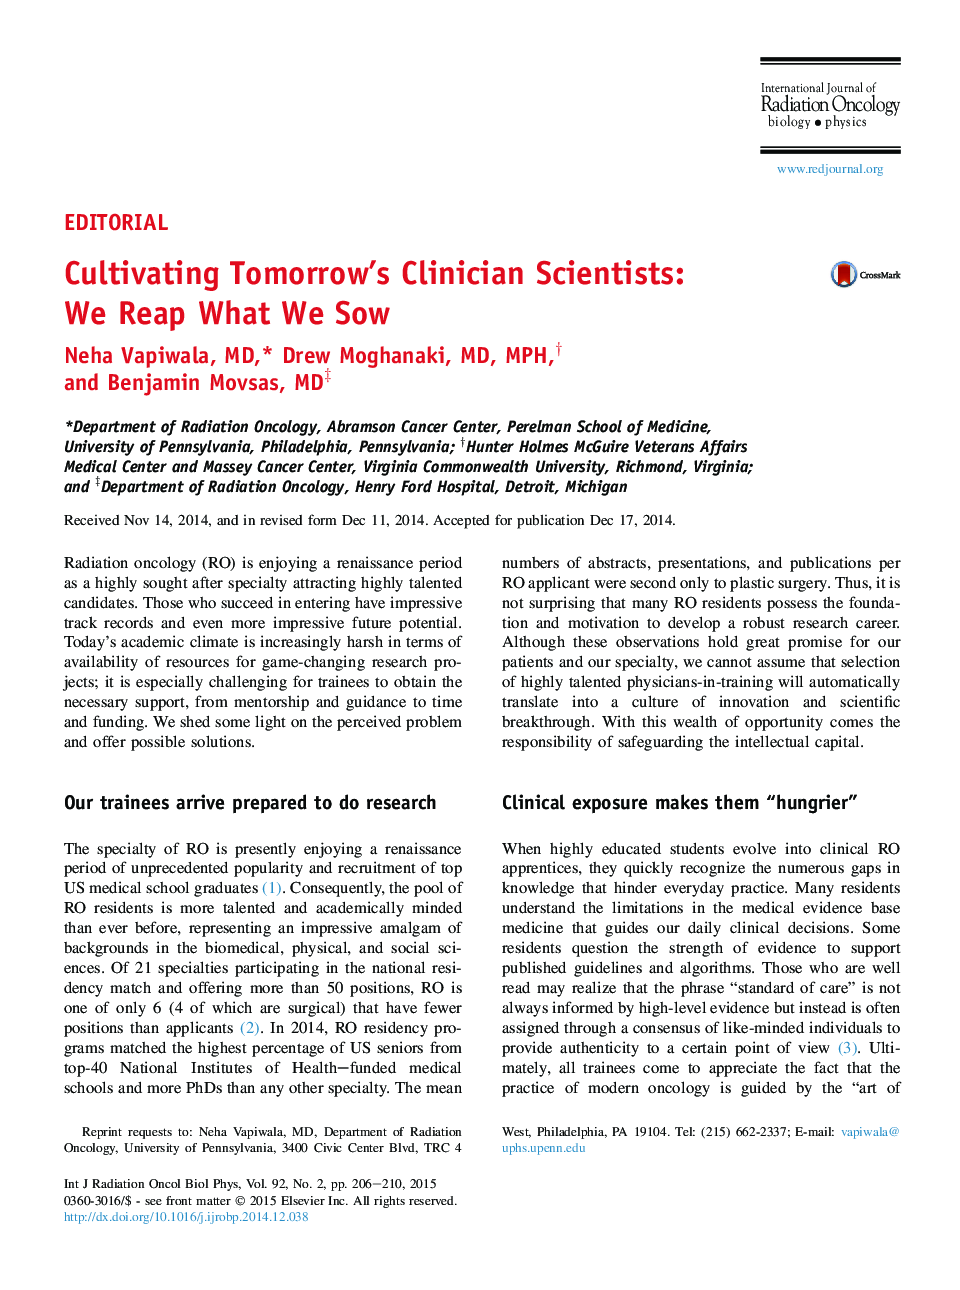 Cultivating Tomorrow's Clinician Scientists: We Reap What We Sow